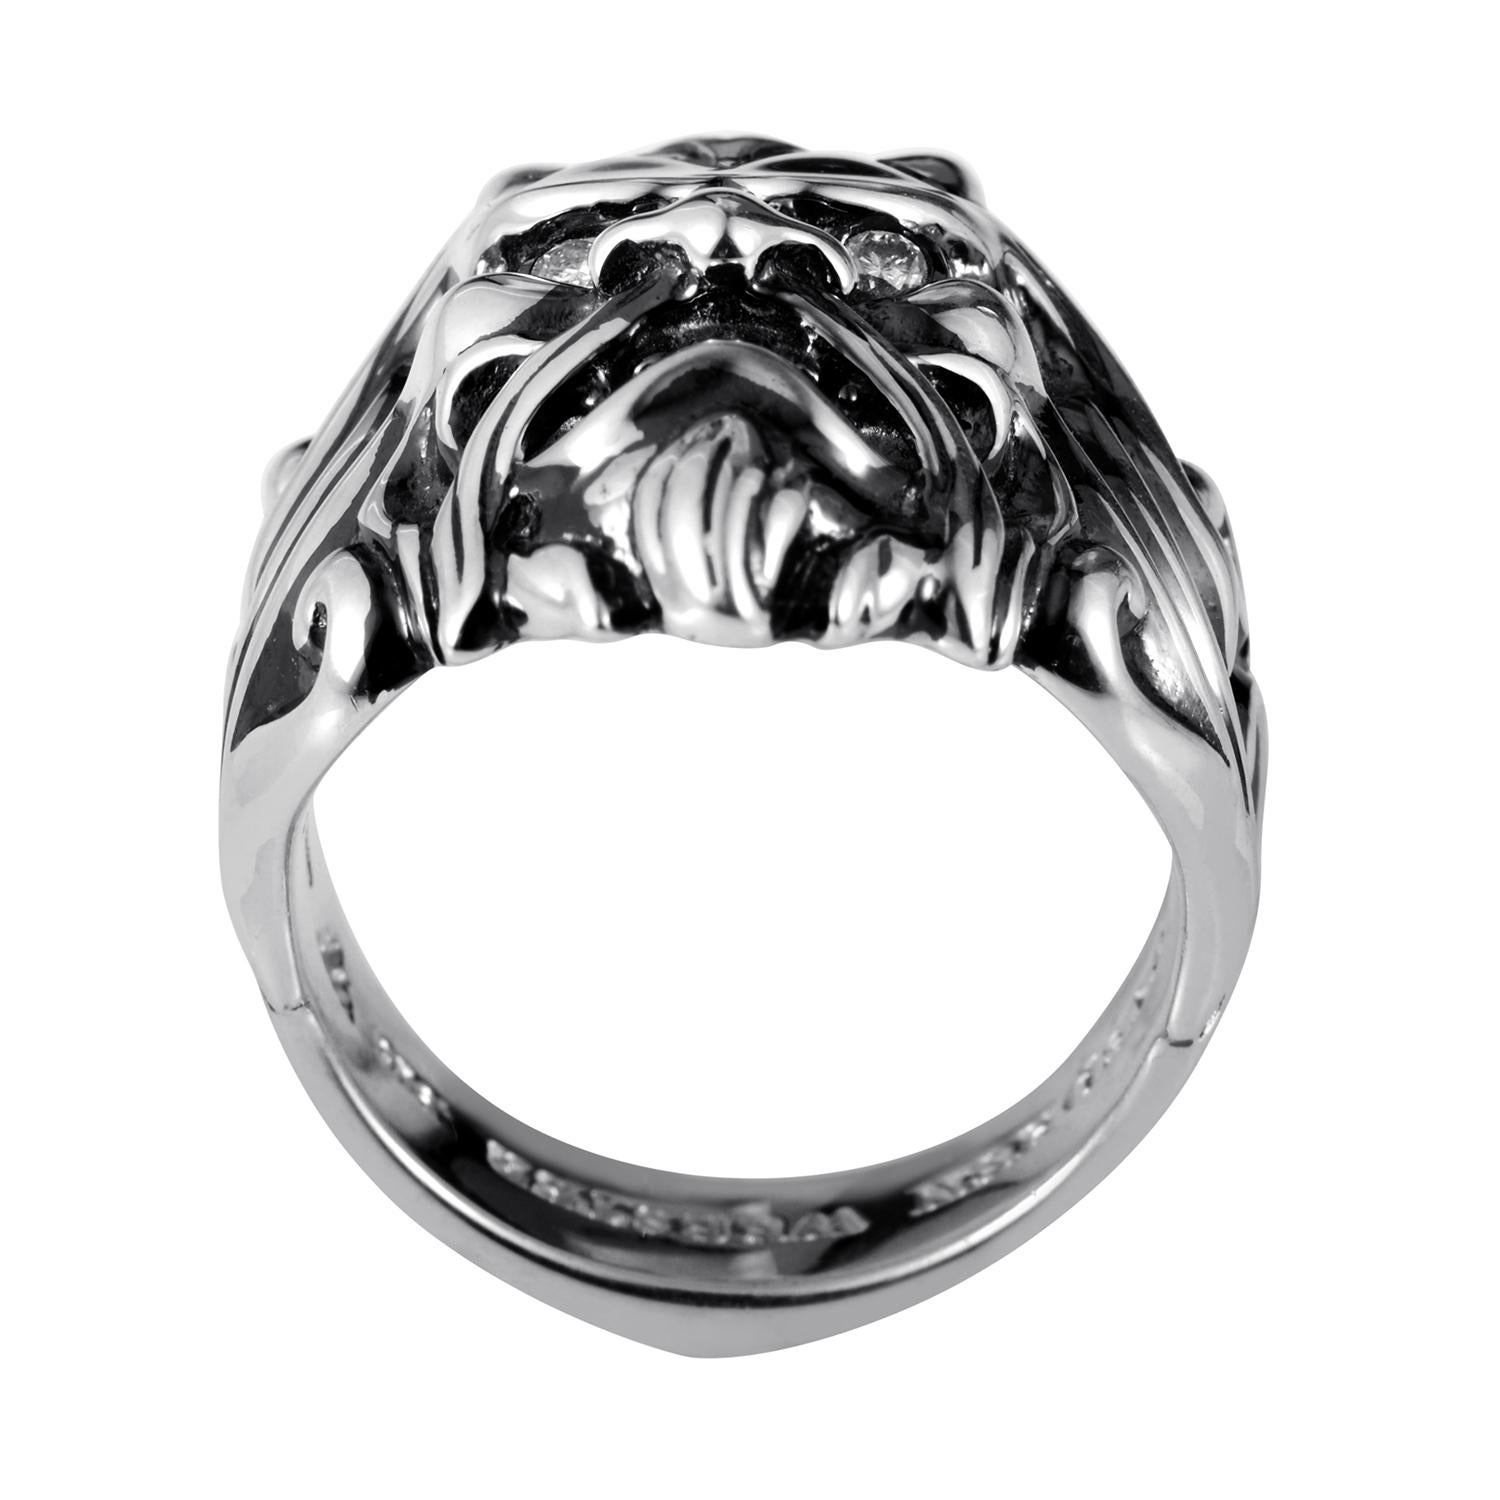 Mystic old-world strength lends its power to modern style with this distinctly masculine men's ring by Stephen Webster. The striking Japanese warrior mask is made of finely crafted sterling silver with dazzling diamond eyes totaling 0.10ct.<Br/>Ring